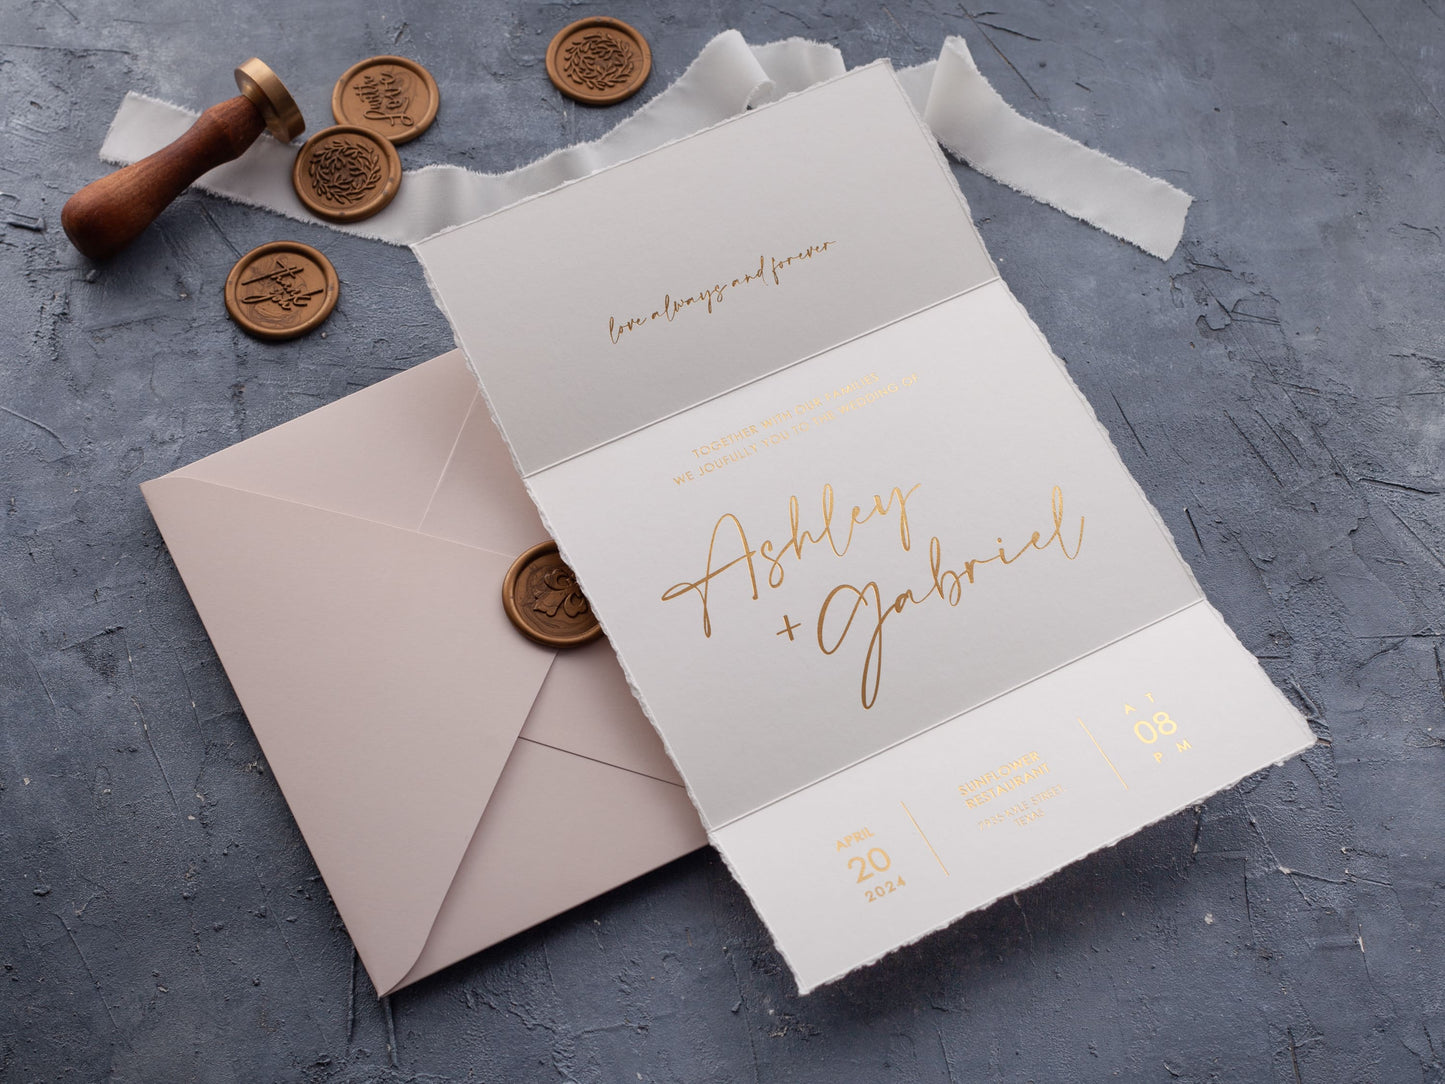 Deckled edge wedding invitation with gold foil print